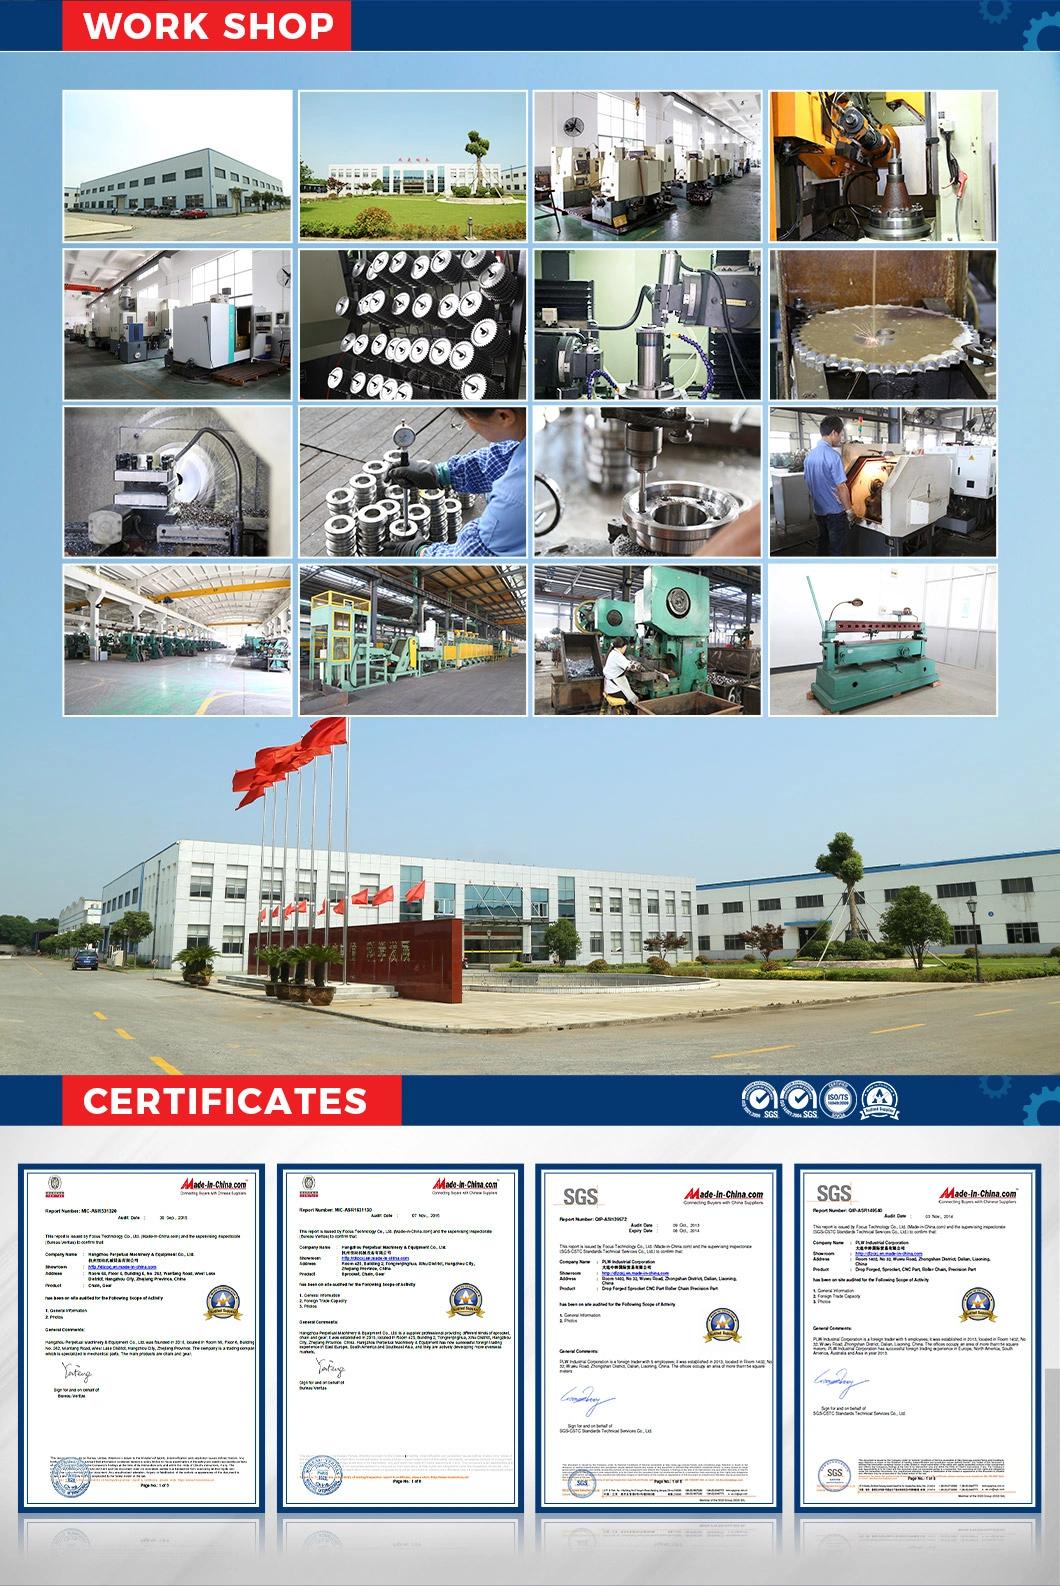 Professional Manufacturer High Strength Agricultural Chain with Attachment